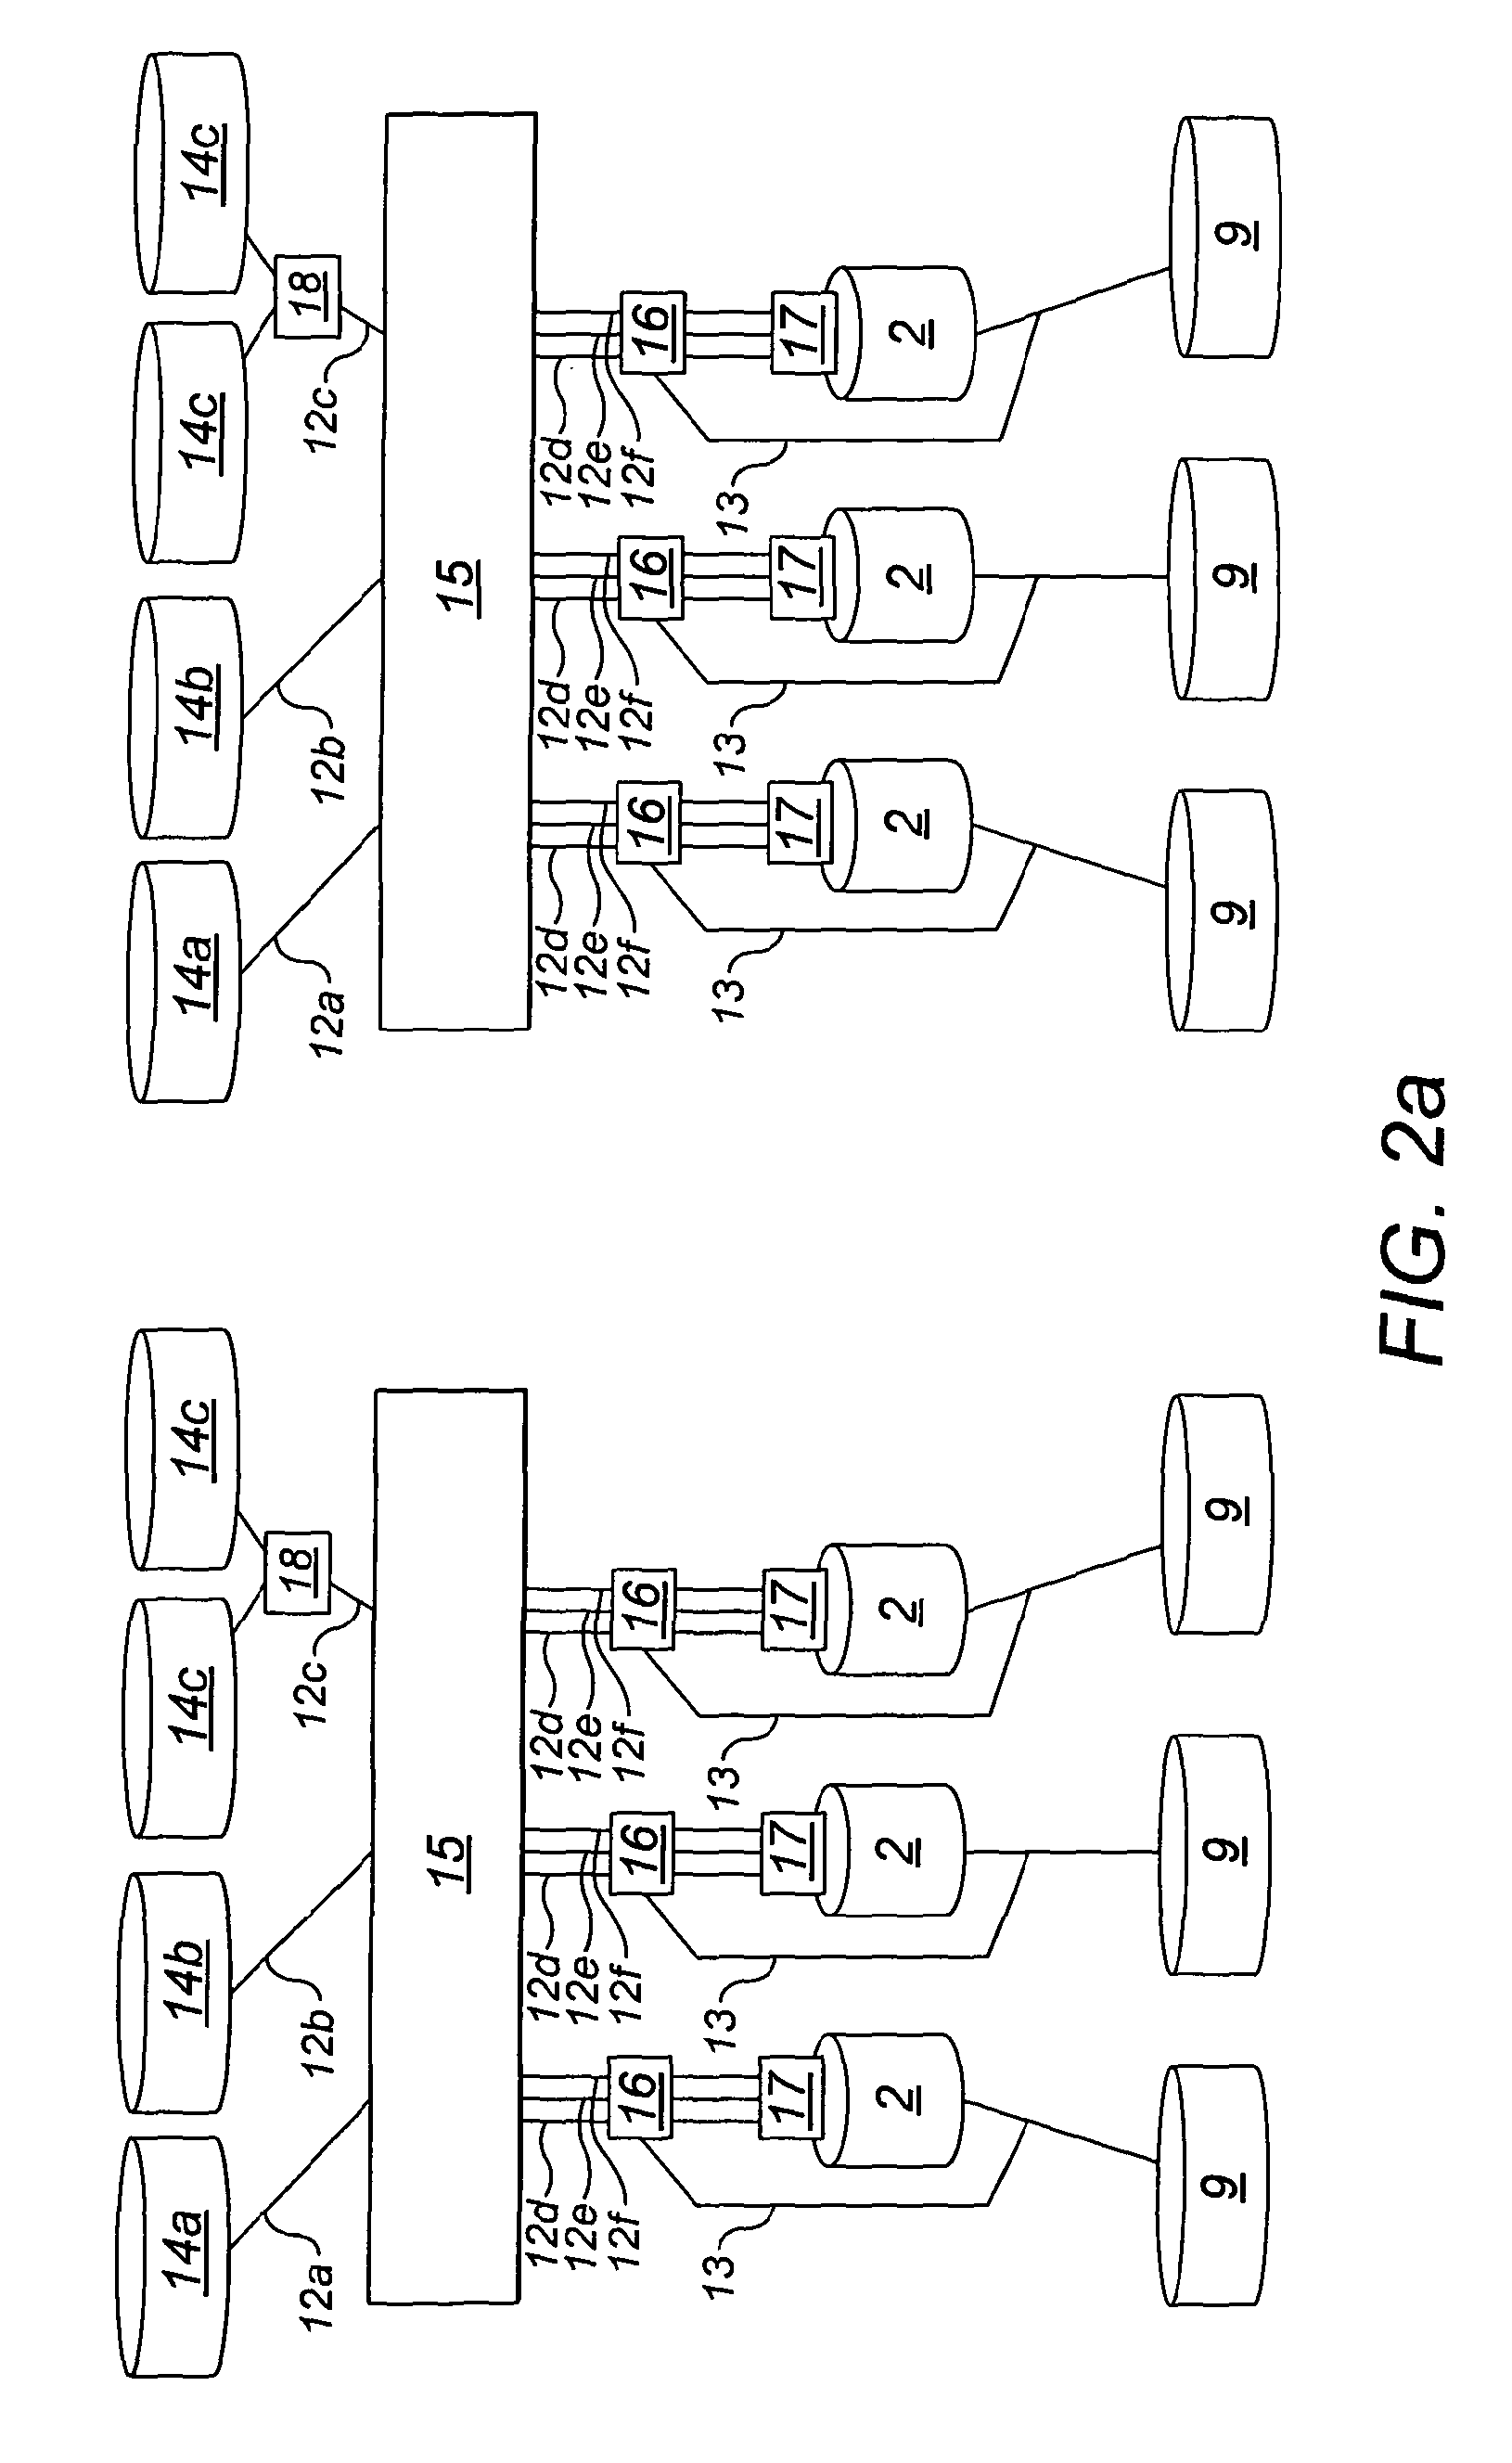 Apparatus and method for testing multiple samples